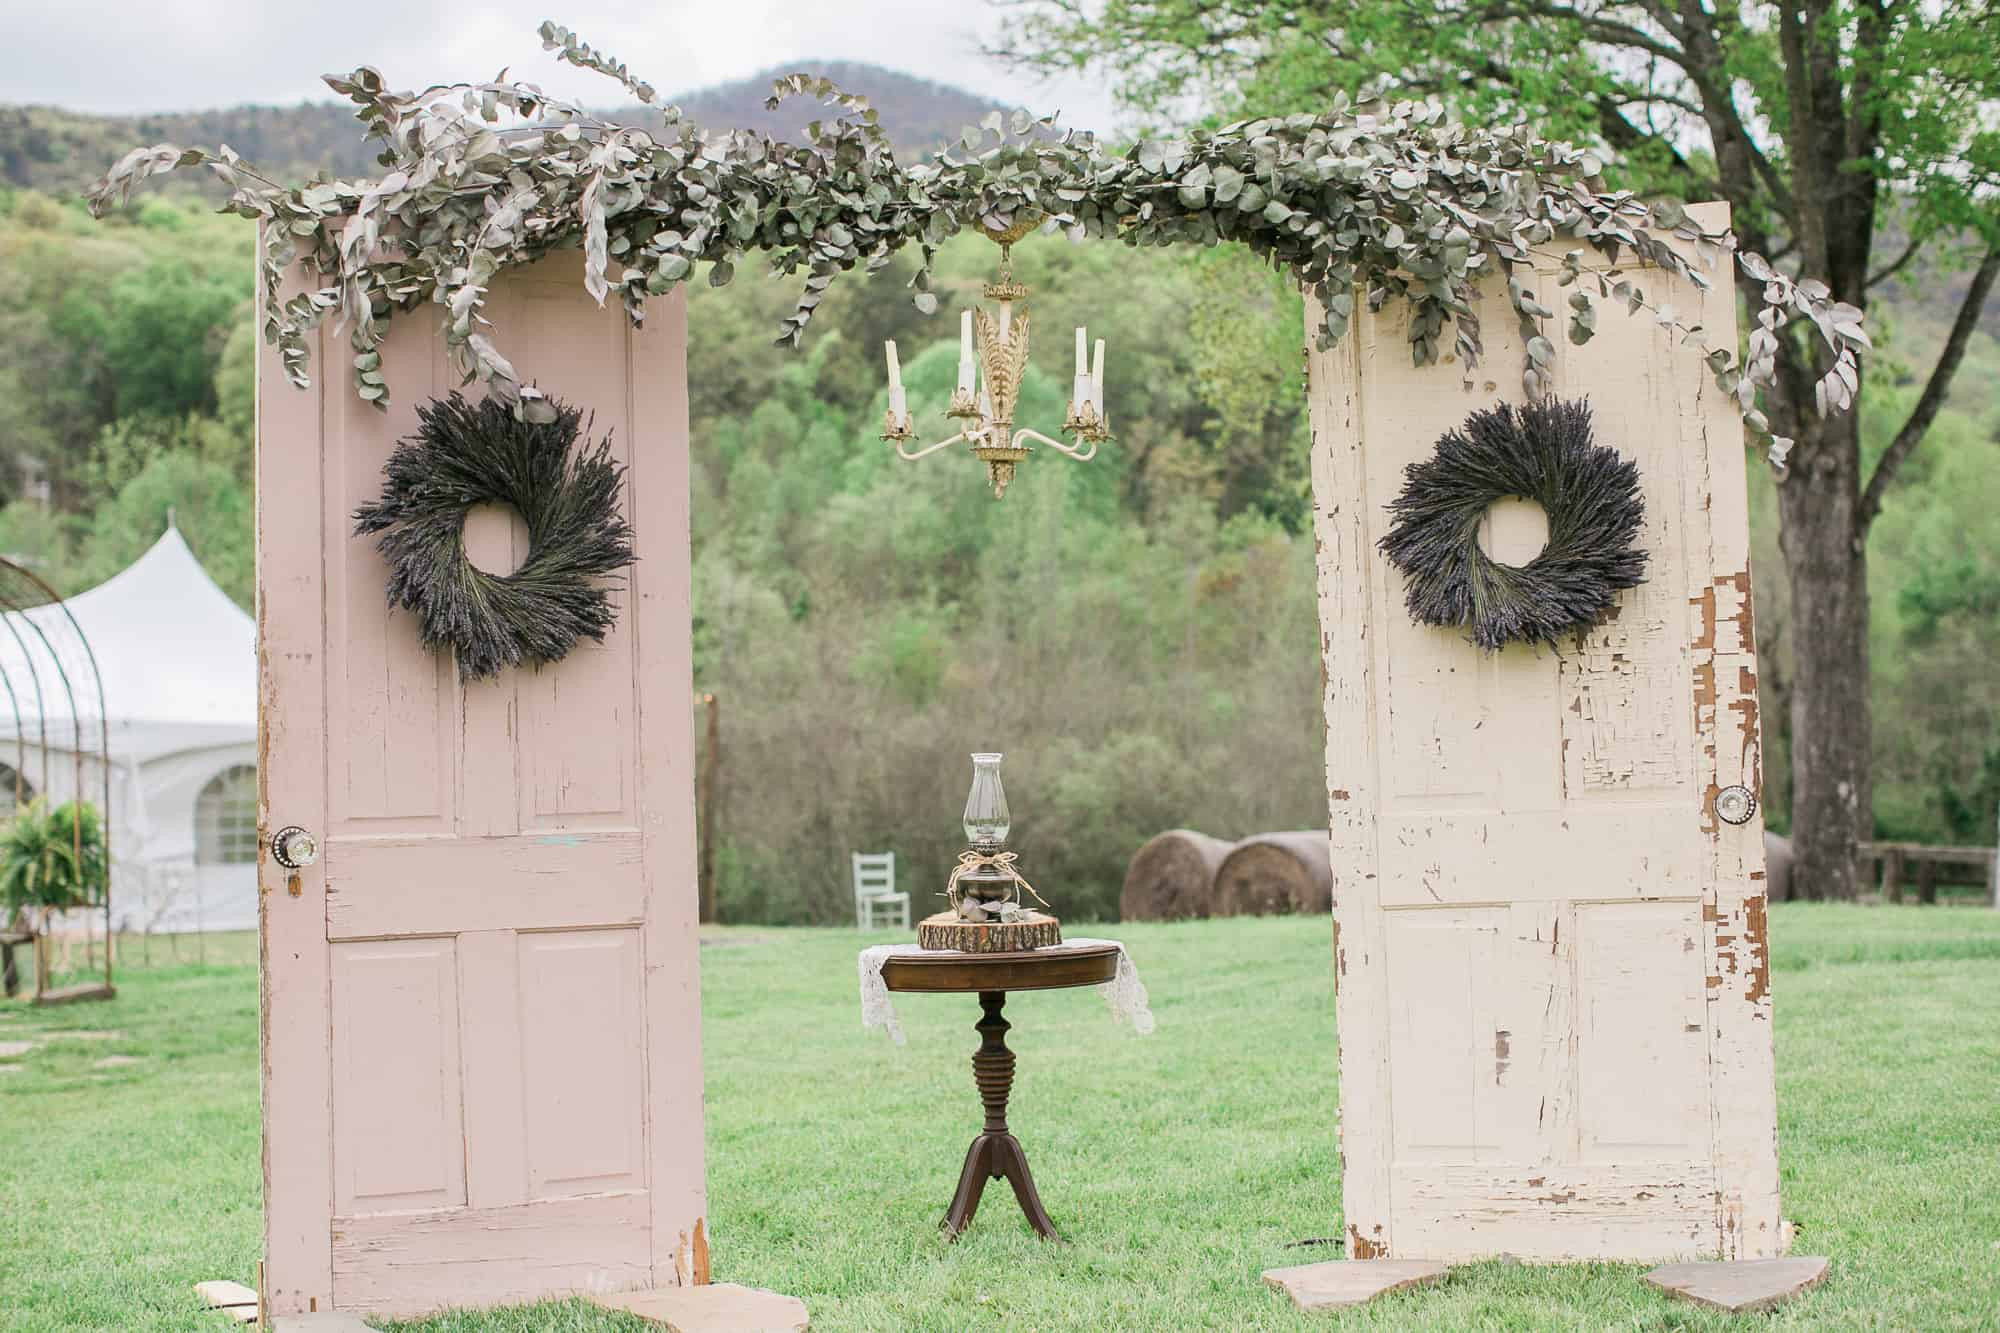 DIY Arch For Wedding
 15 DIY Wedding Arches To Highlight Your Ceremony With